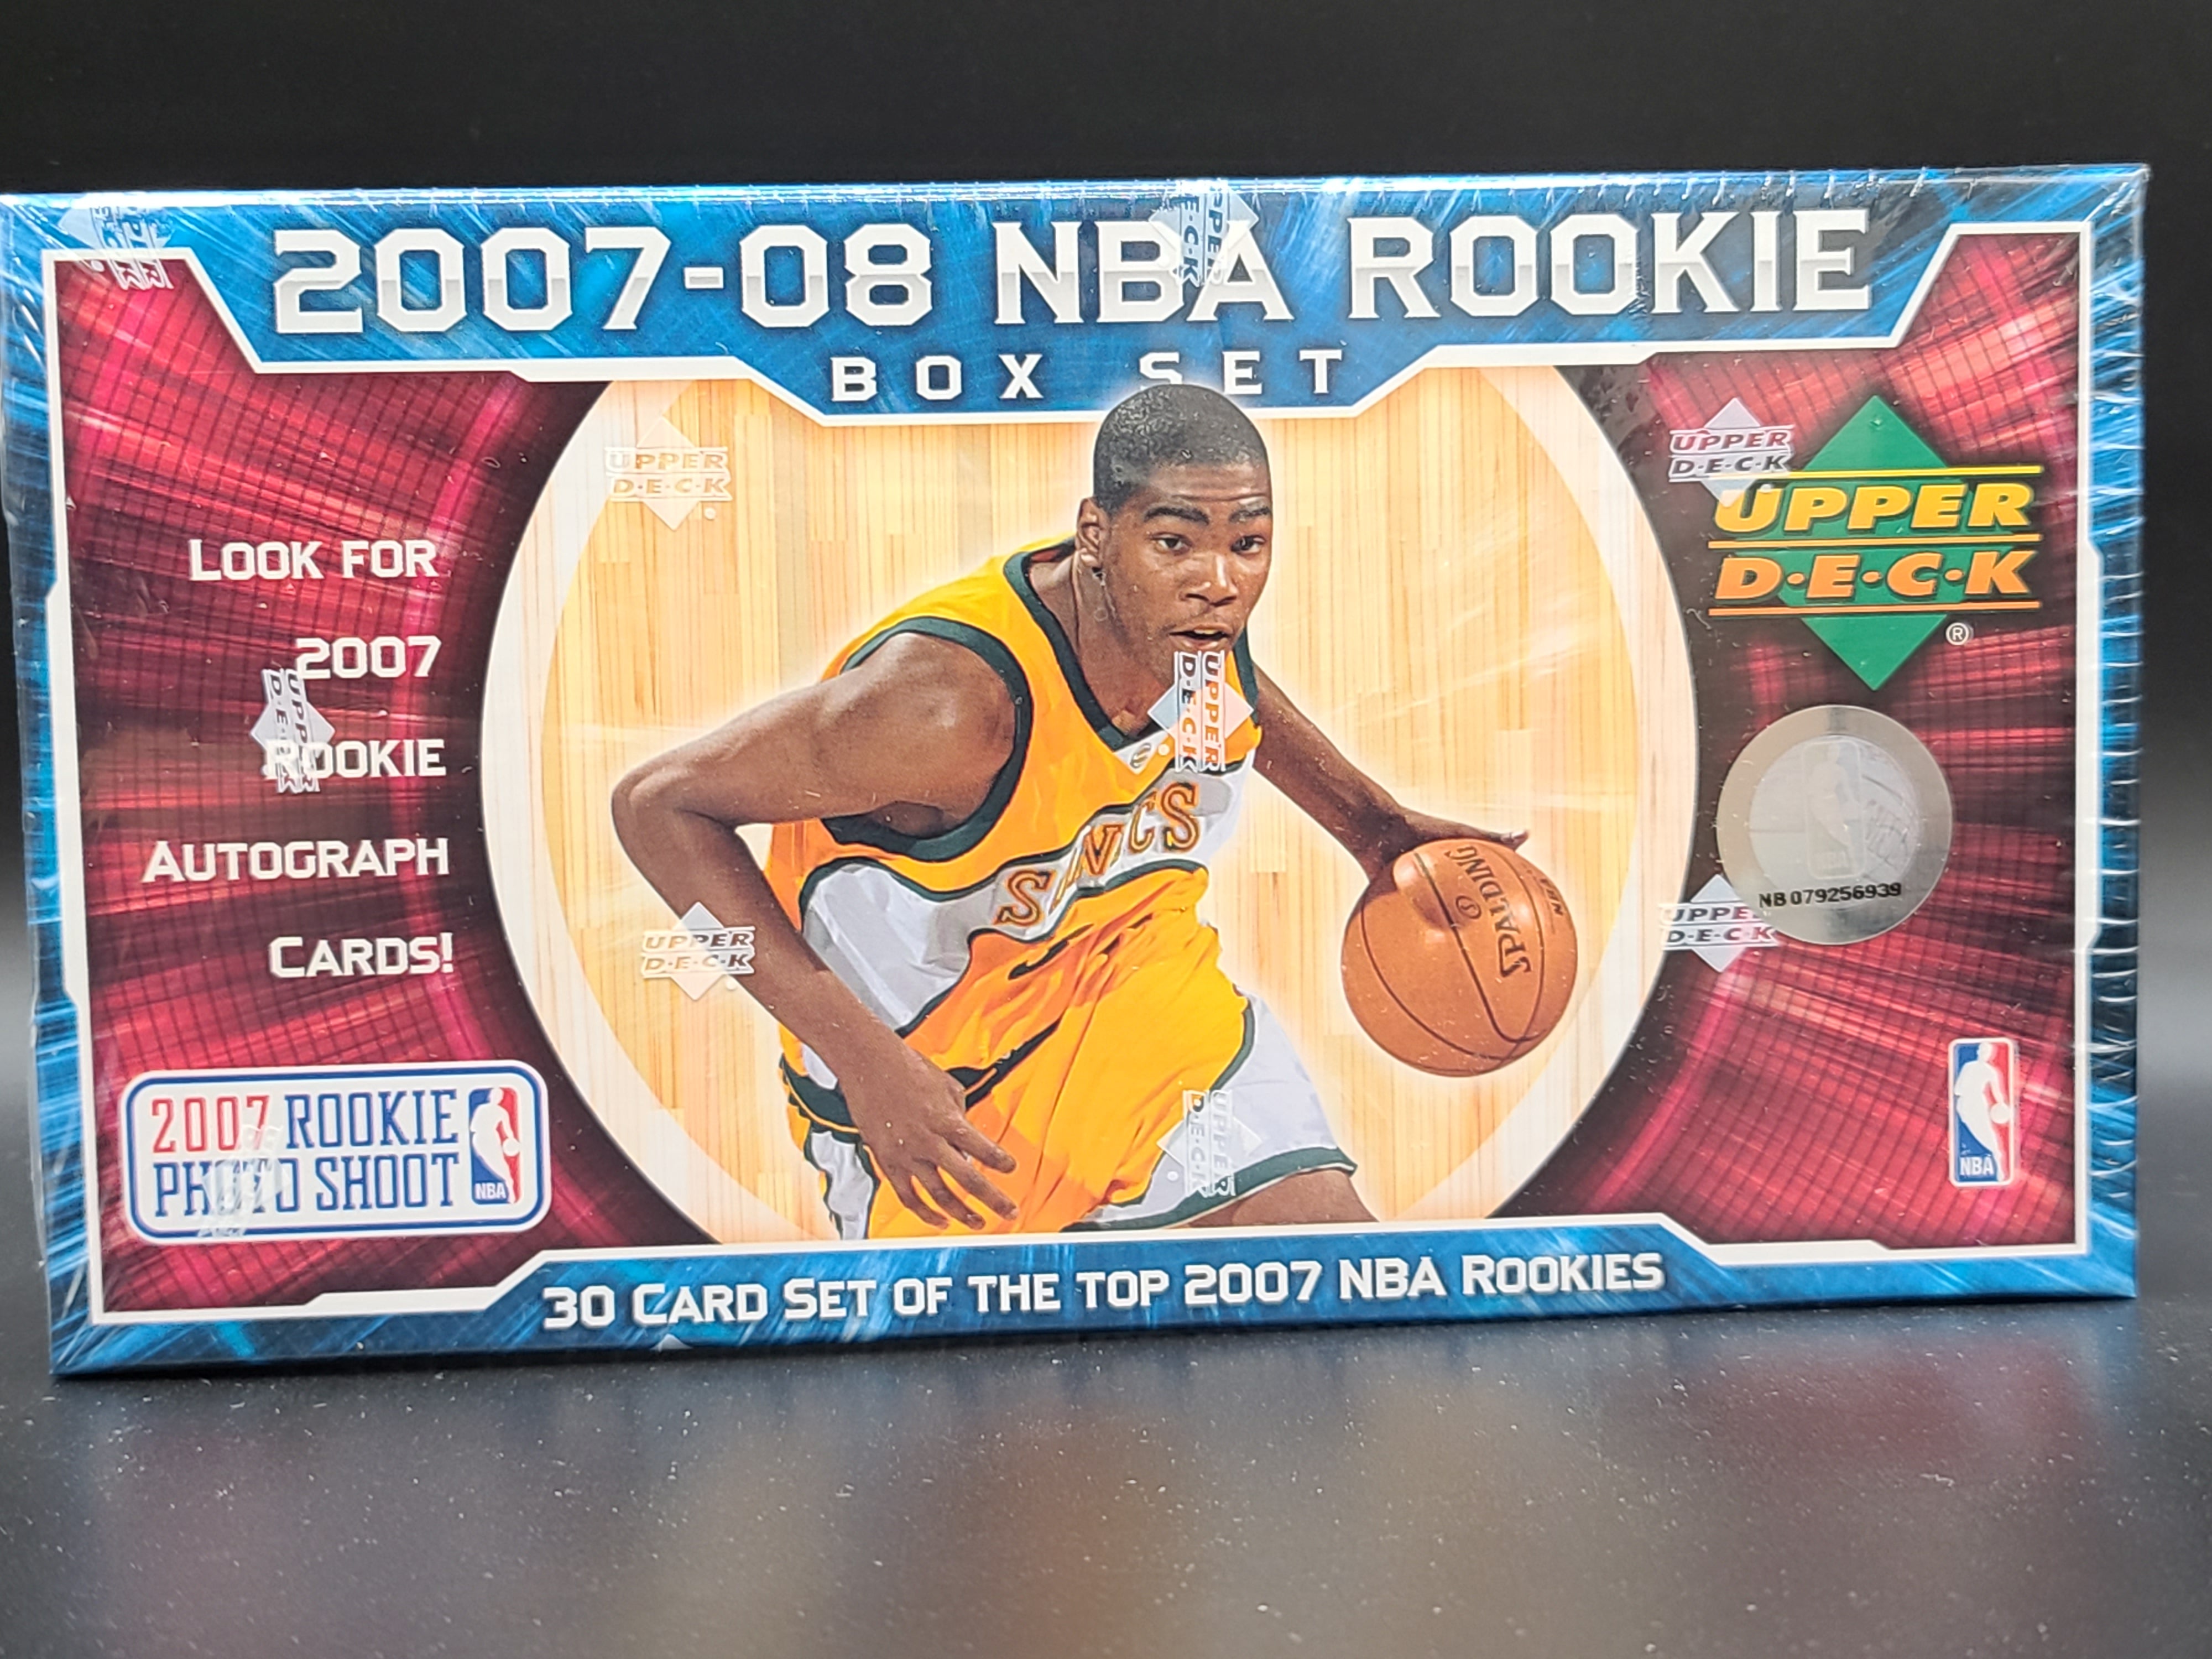 NBA Throwback Microfiber Composite Basketball from 2007